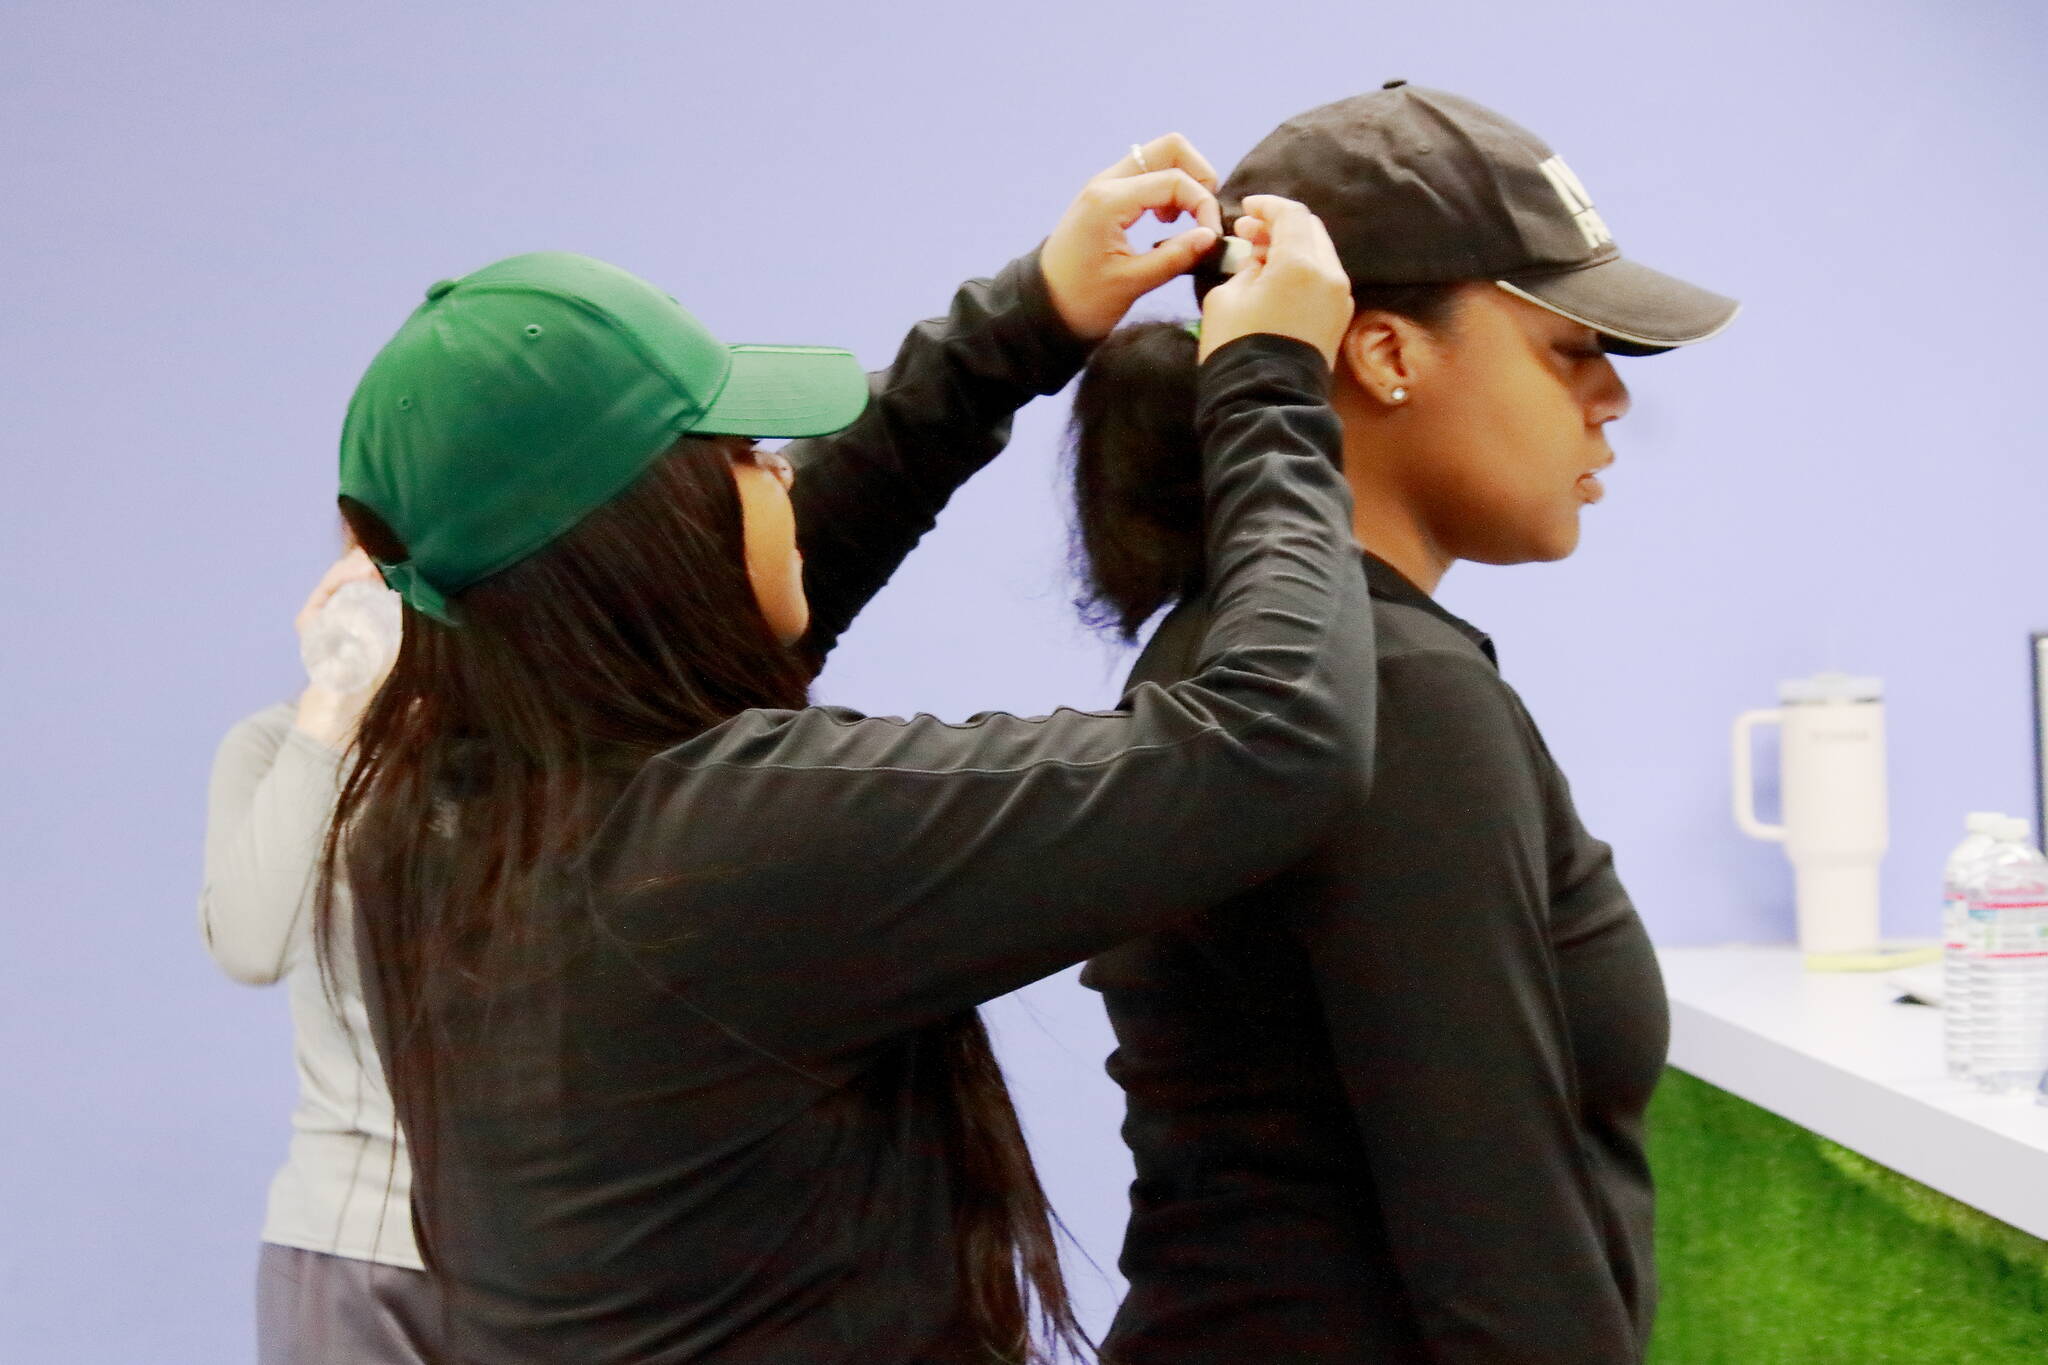 Jayden Bullard mends Rhona Grant-Giles' hat during a break on Tuesday night at the Trap Lab.  The boutique fitness studio was created to be a place of support and sisterhood, according to founders Icea Pettigrew and Sharde Bullard.